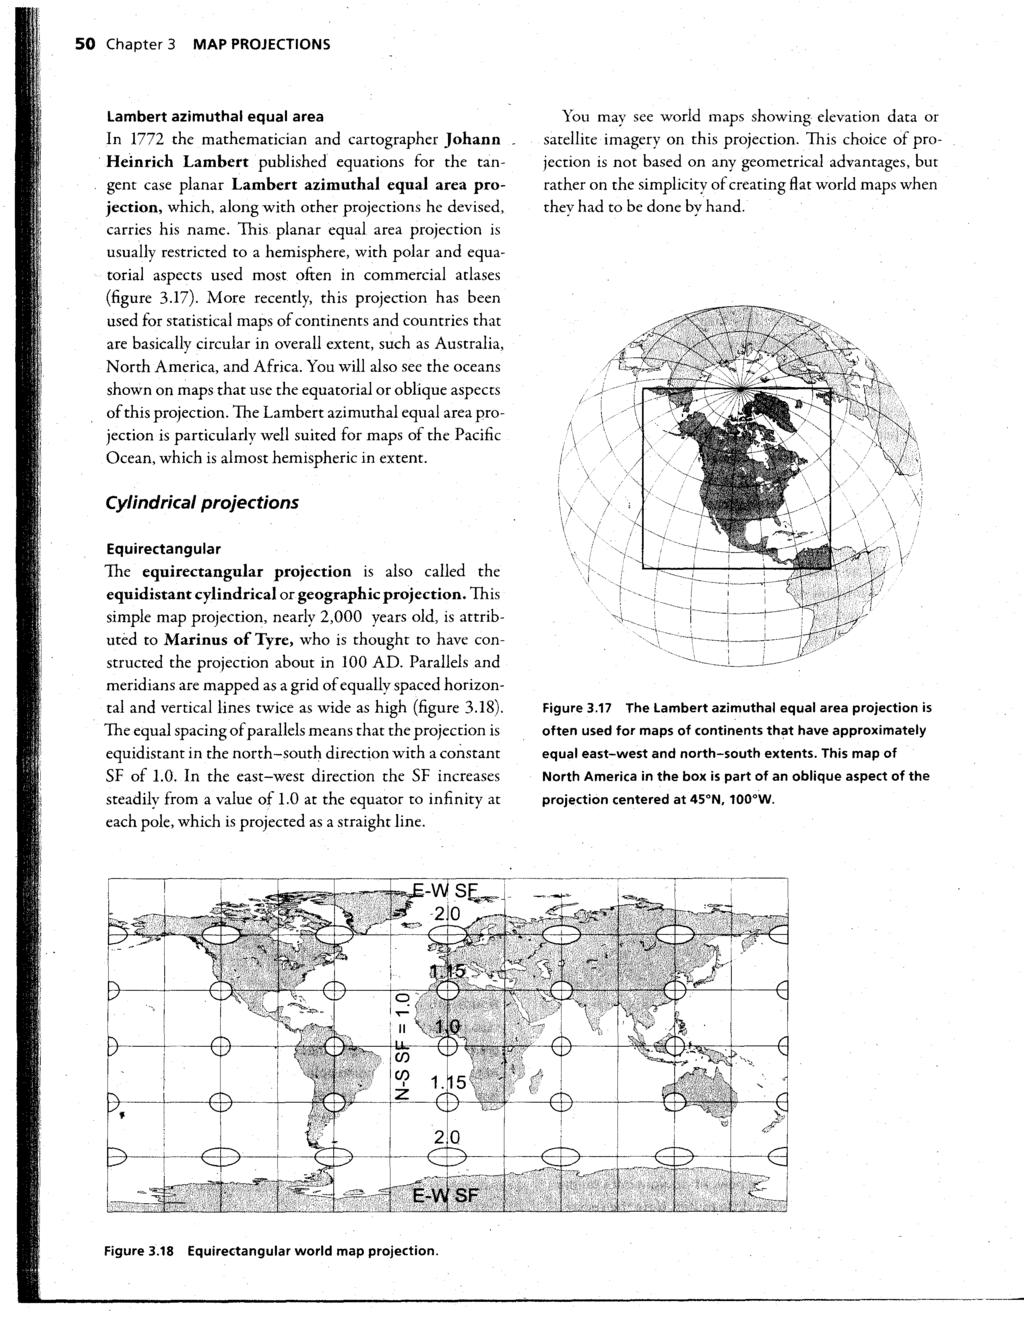 50 Chapter 3 MAP PROJECTIONS Lambert azimuthal equal area In 1772 the mathematician and cartographer Johann Heinrich Lambert published equations for the tangent case planar Lambert azimuthal equal